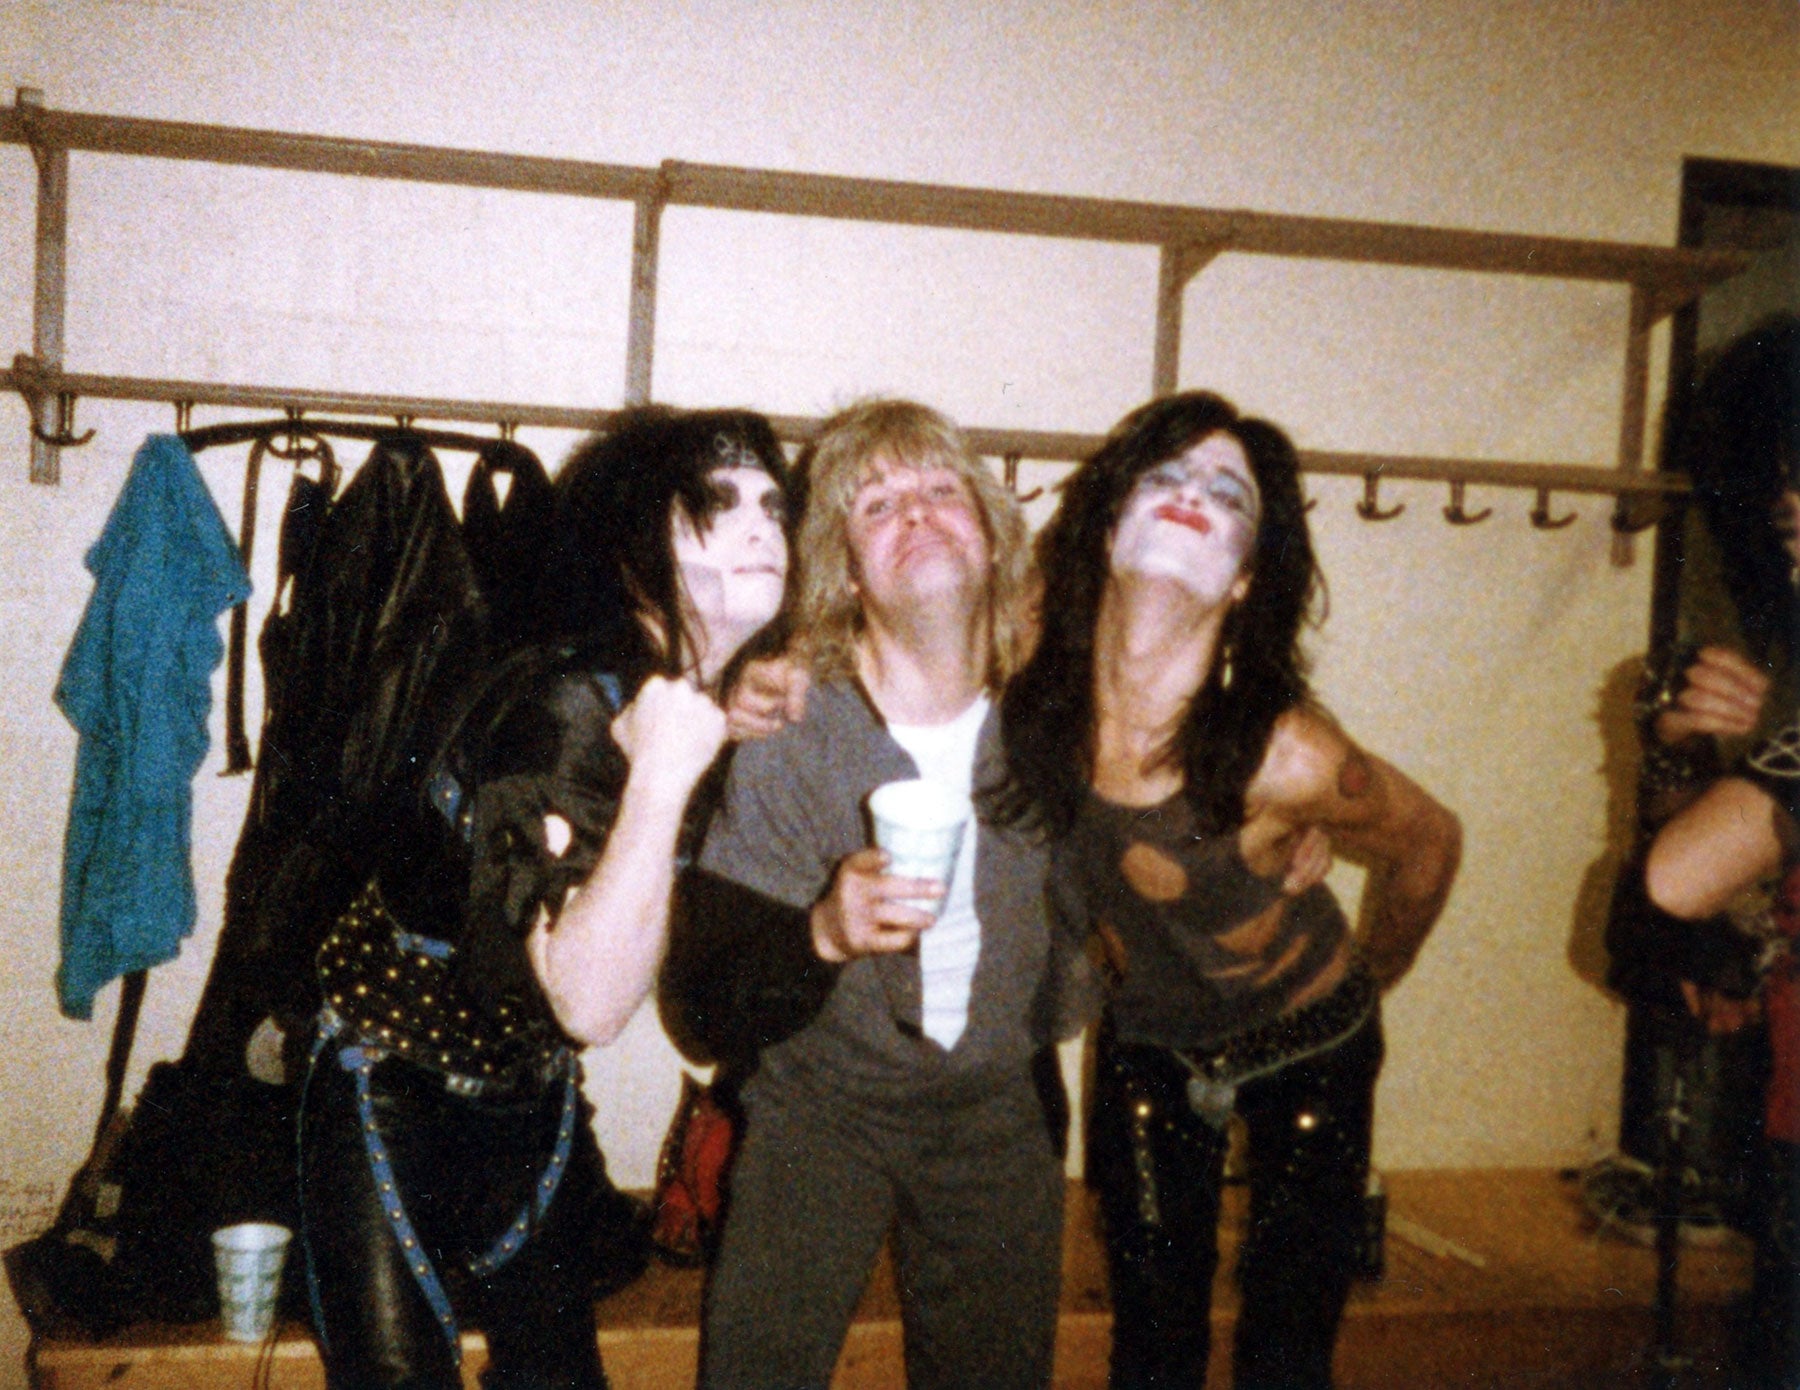 Mick, Tommy, and Ozzy